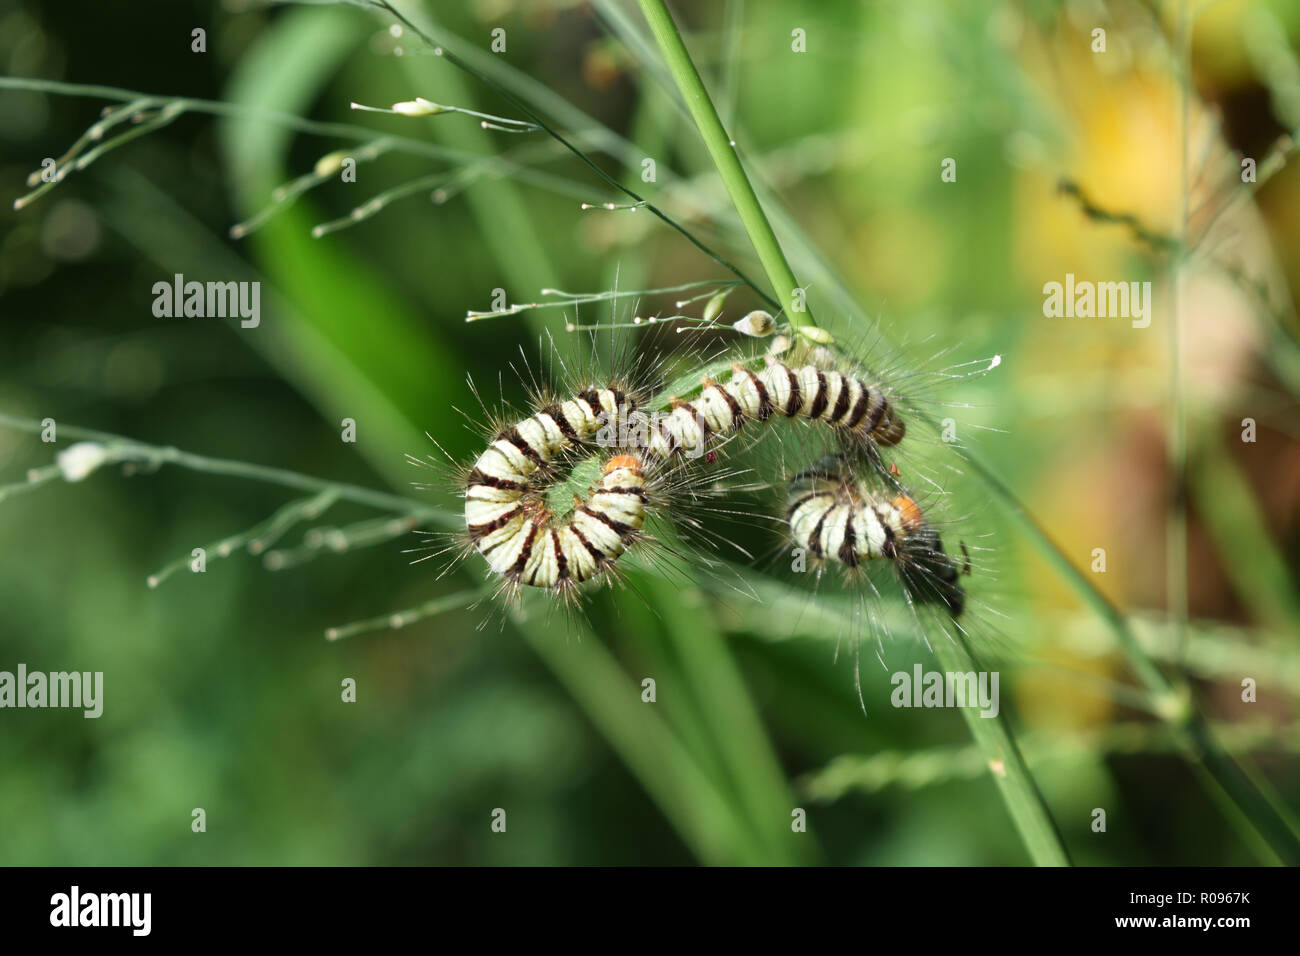 Group of Caterpillars orange head and furry throughout the body with white stripes and black on grass, Worm of Asota producta moth Stock Photo